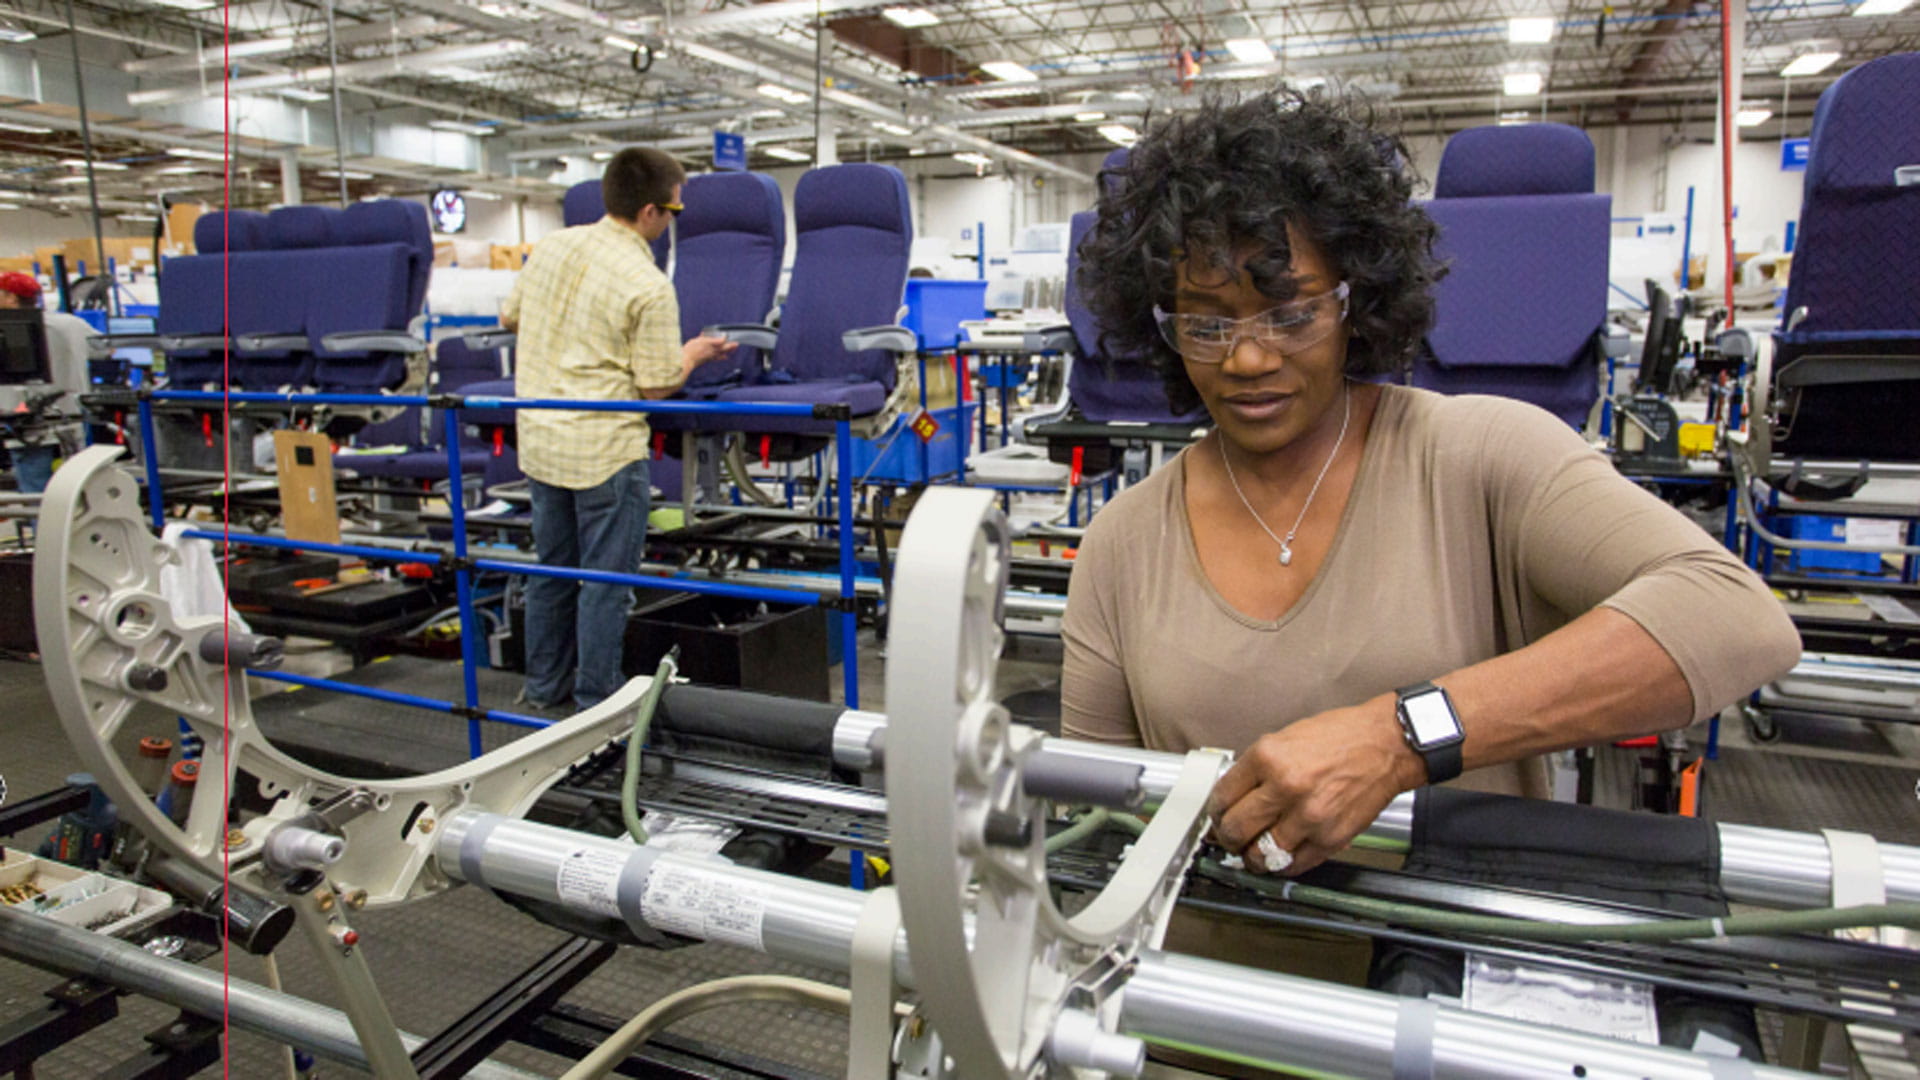 A woman works on an assembly line